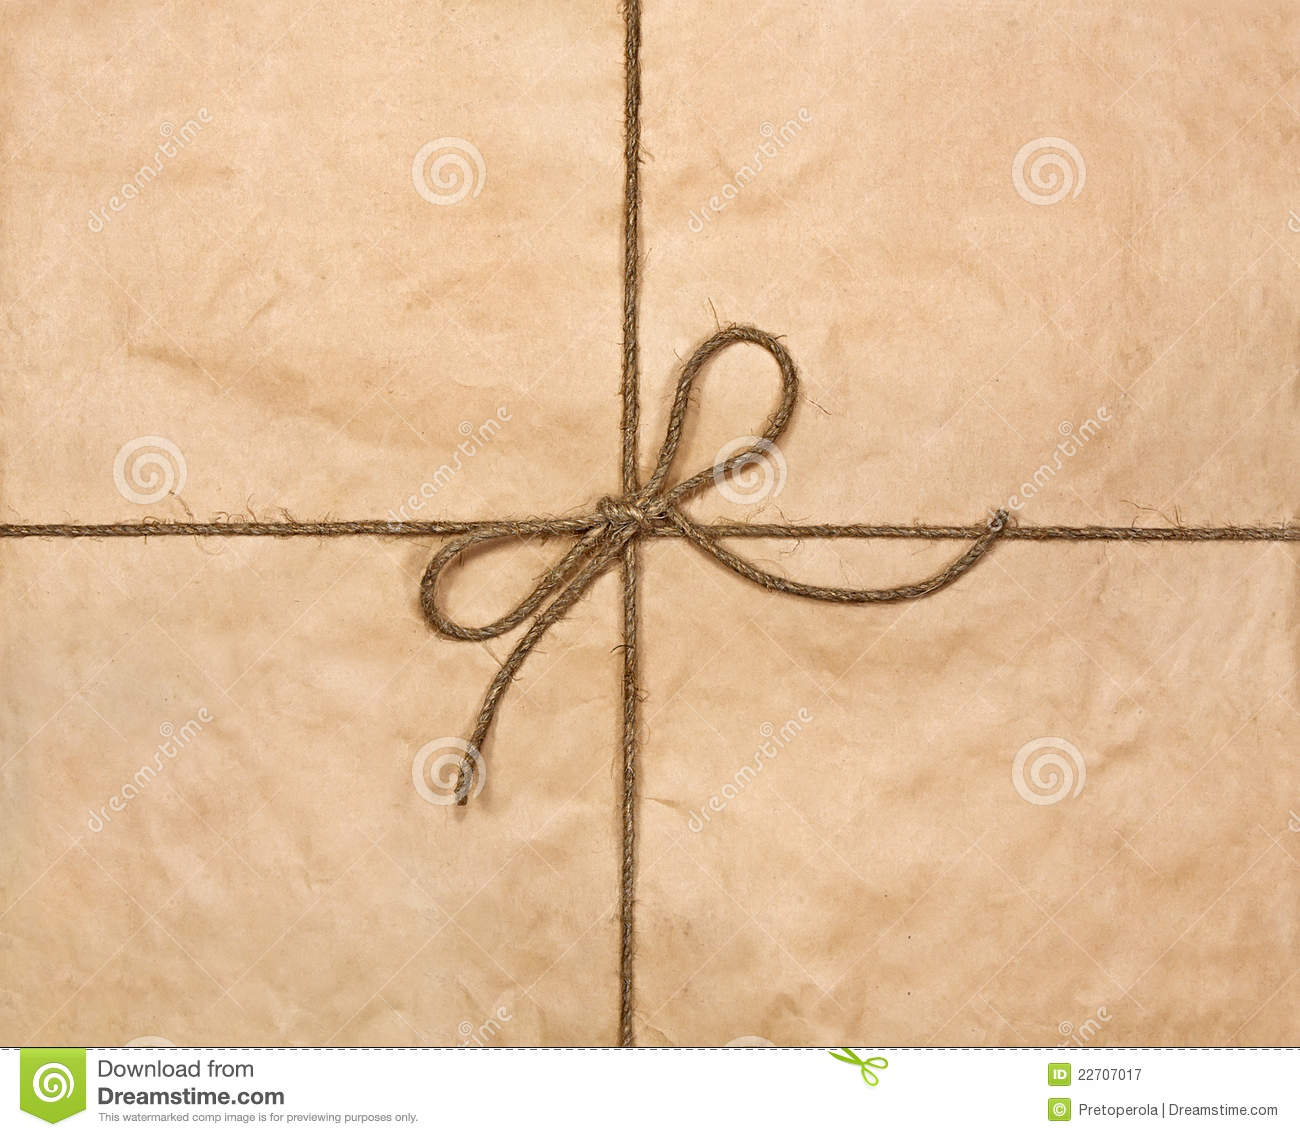     Free Stock Photography  String Tied In A Bow On A Brown Recycled Paper